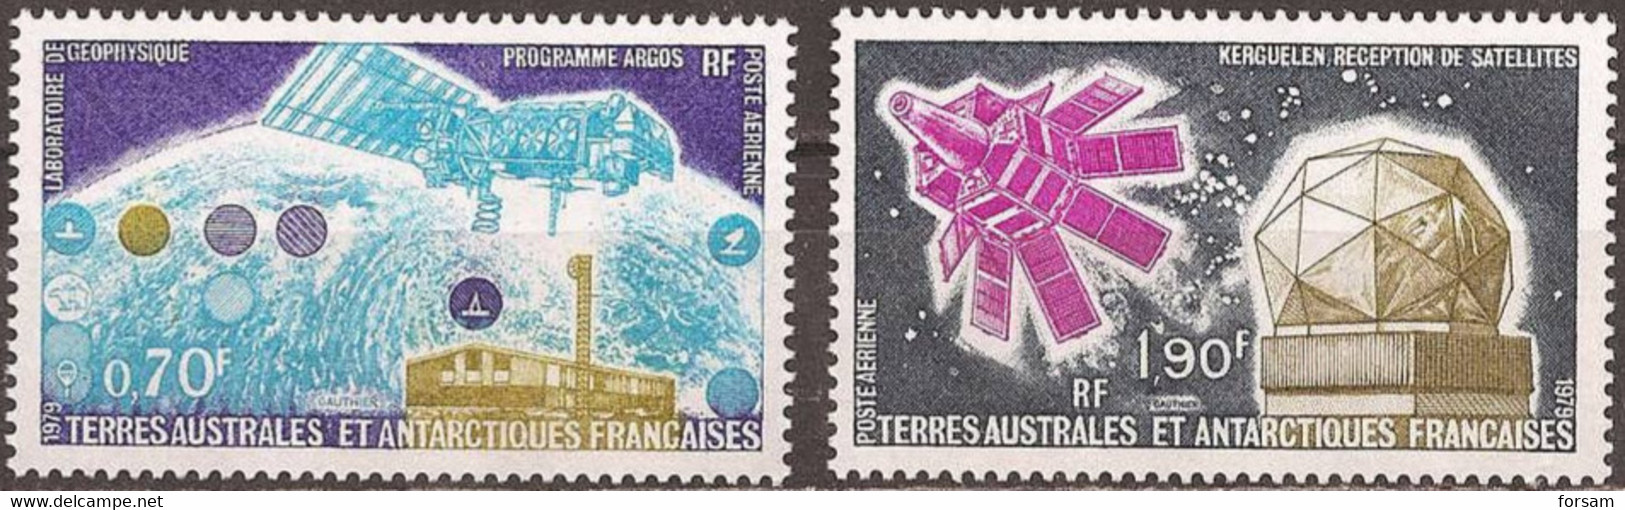 FRENCH SOUTHERN And ANTARCTIC TERR..1979..Michel # 128-129...MNH. - Unused Stamps